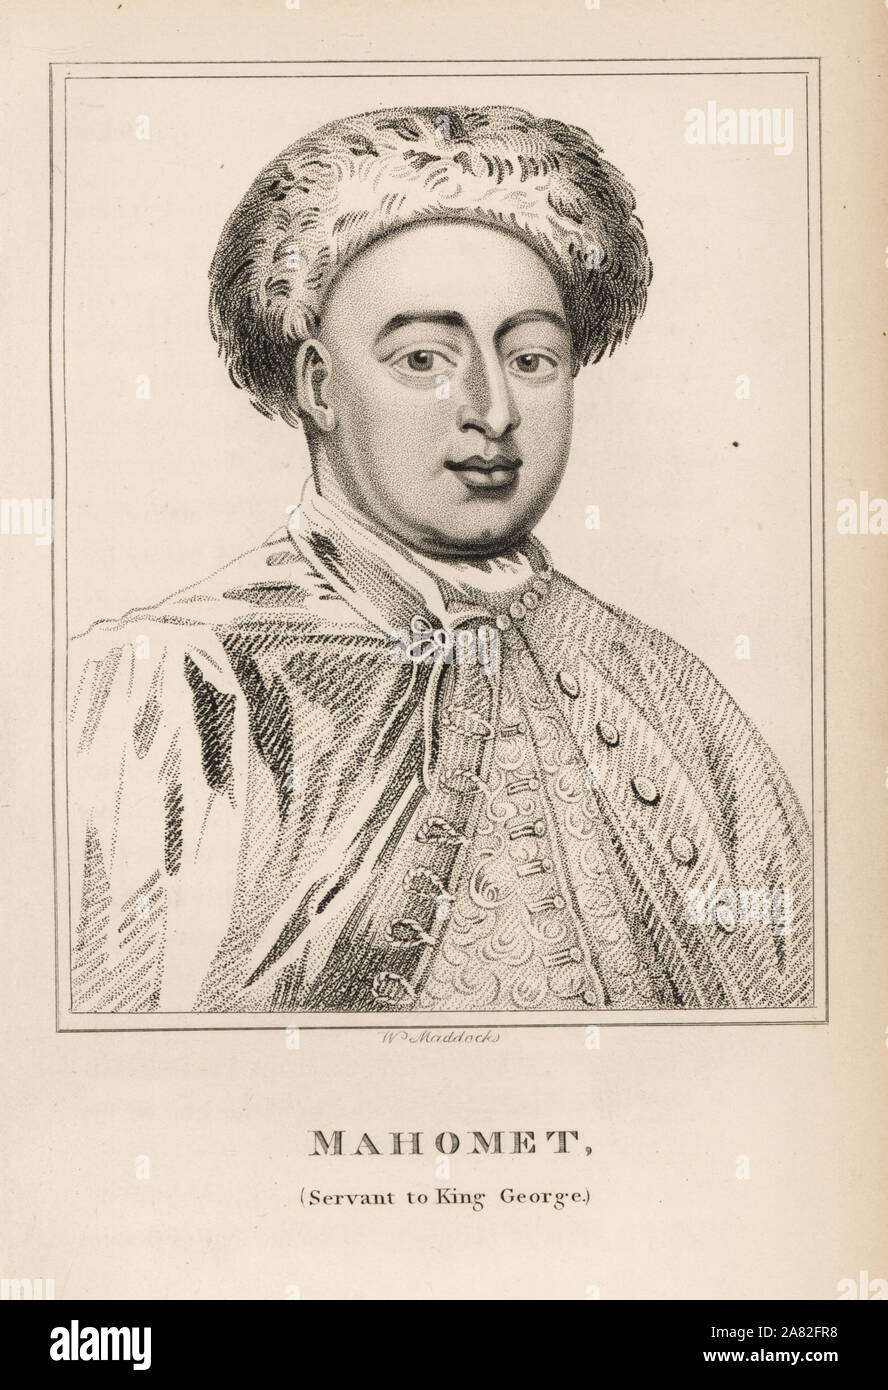 Louis Maximilian Mahomet, Turkish servant to King George I, died 1726. Engraving by W. Maddocks from James Caulfield's Portraits, Memoirs and Characters of Remarkable Persons, London, 1819. Stock Photo